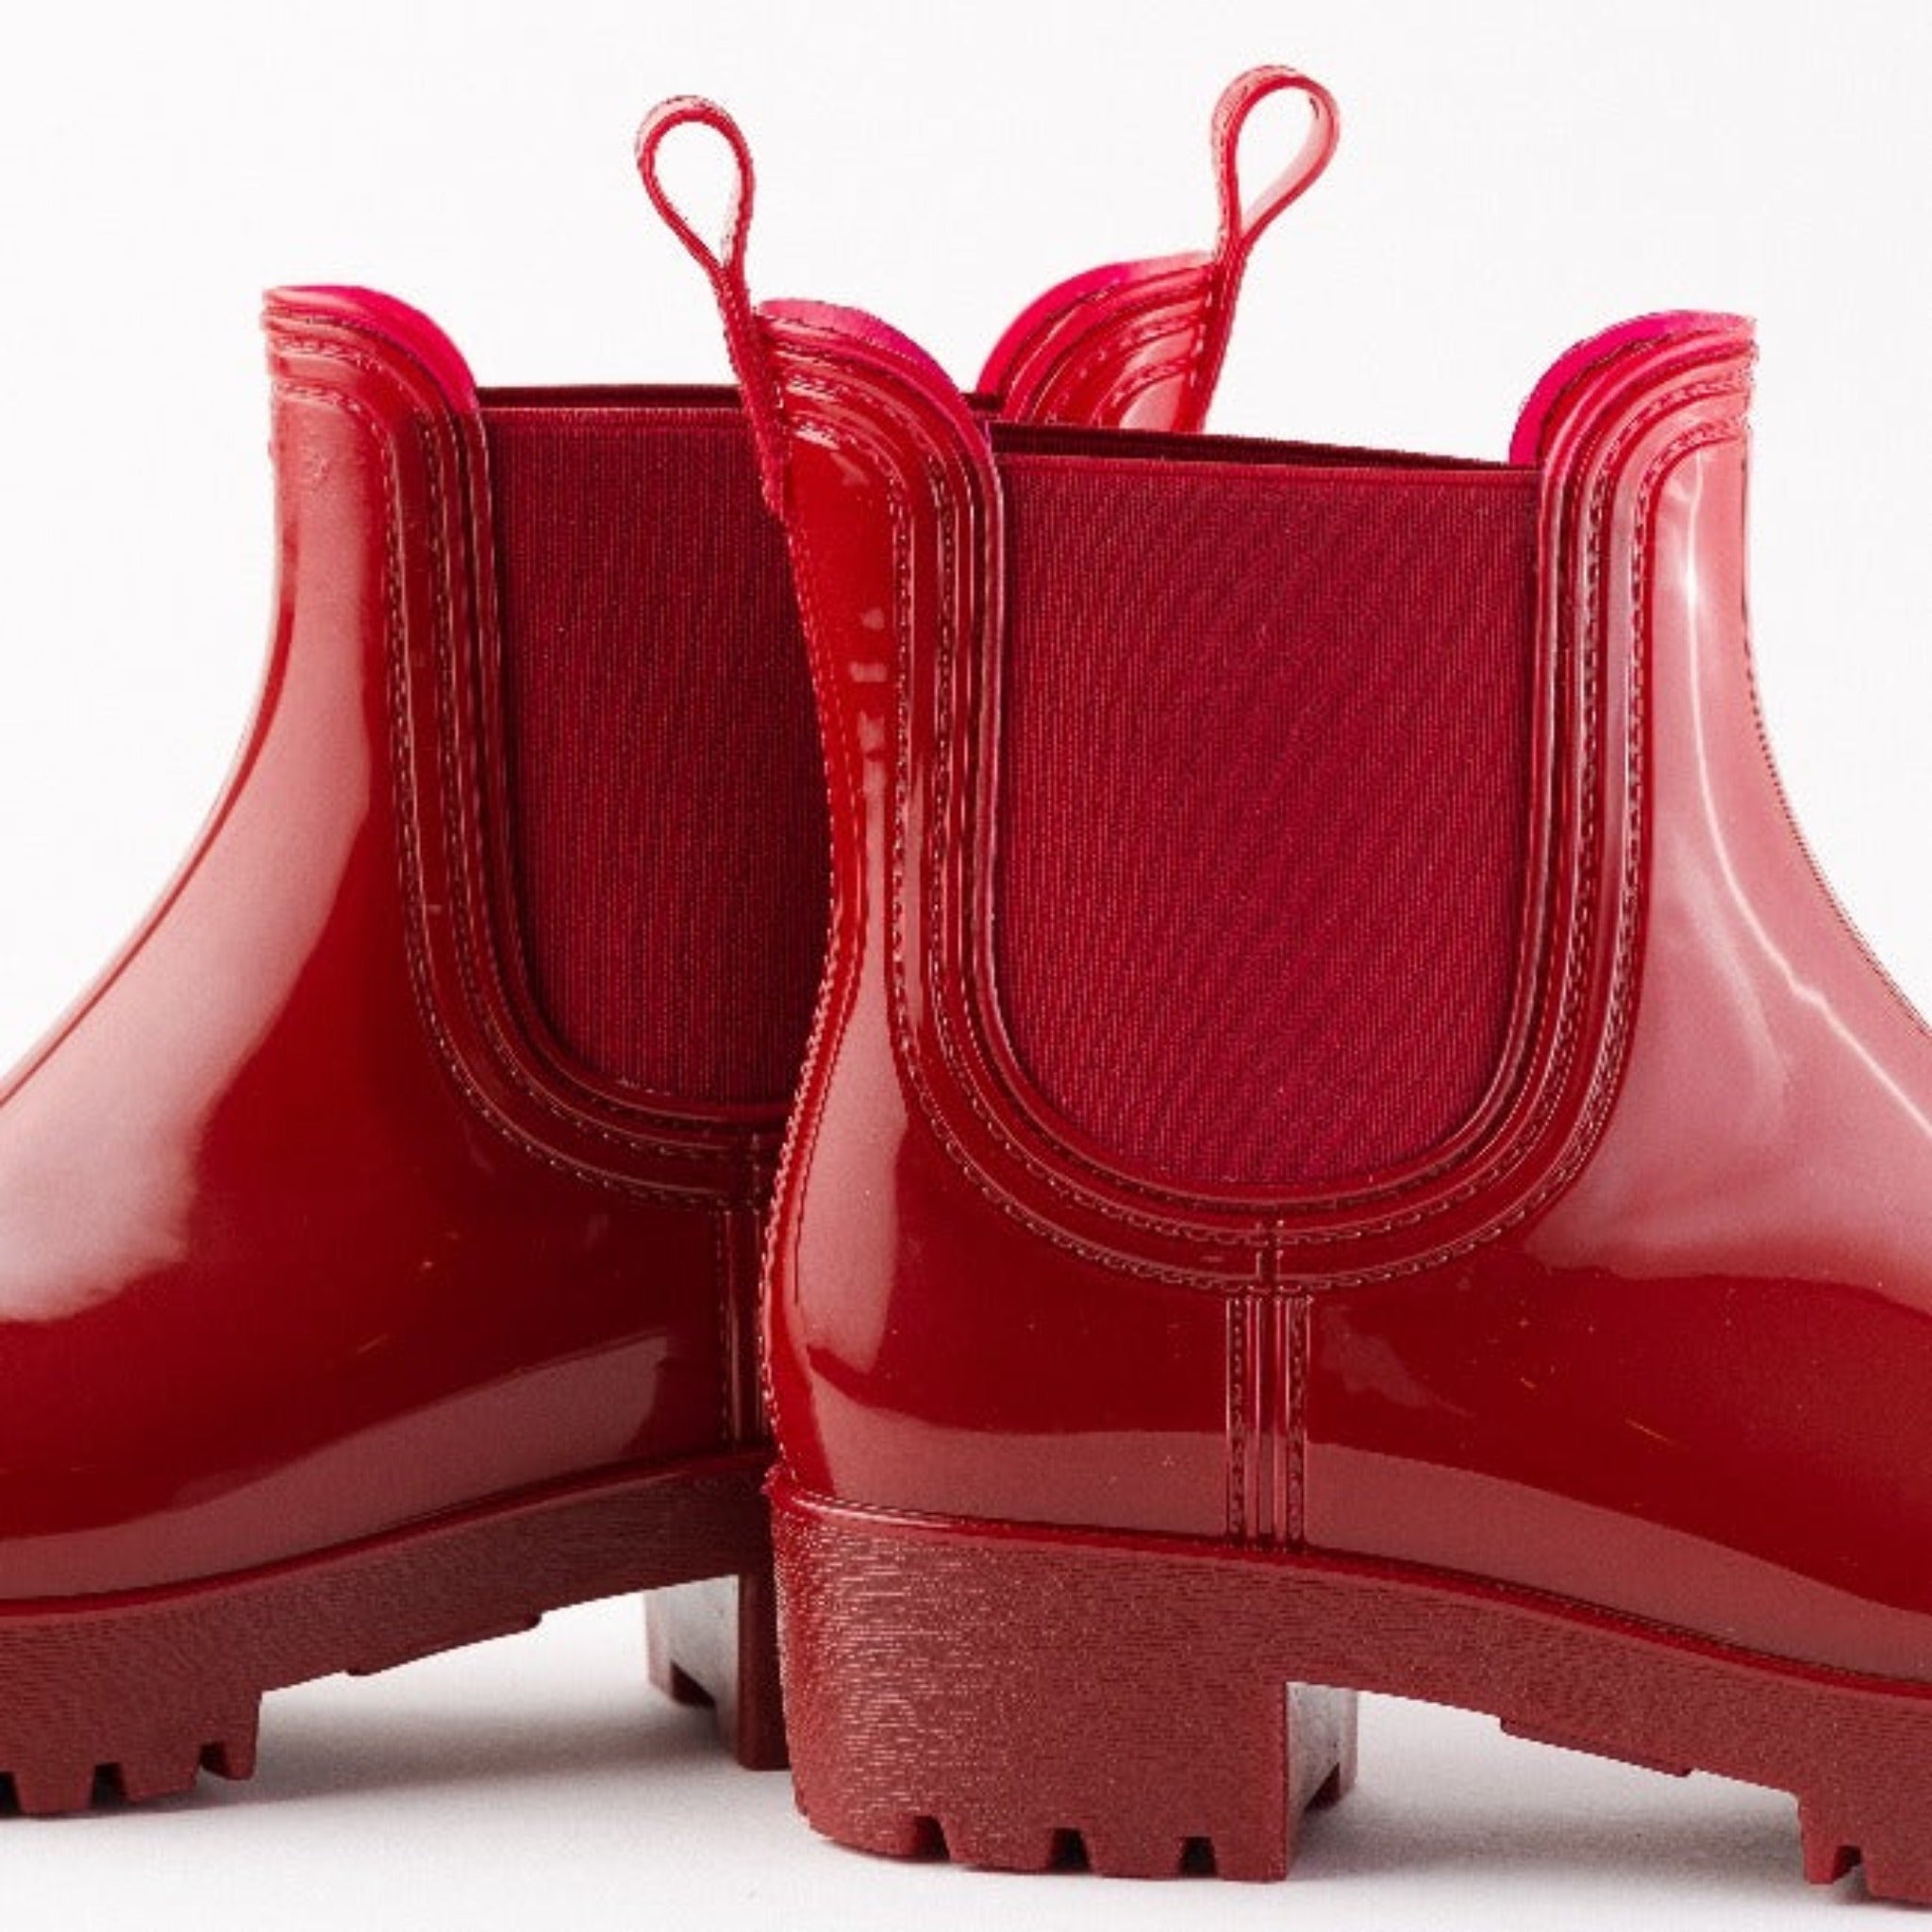 Misty Boot-Brick Red 